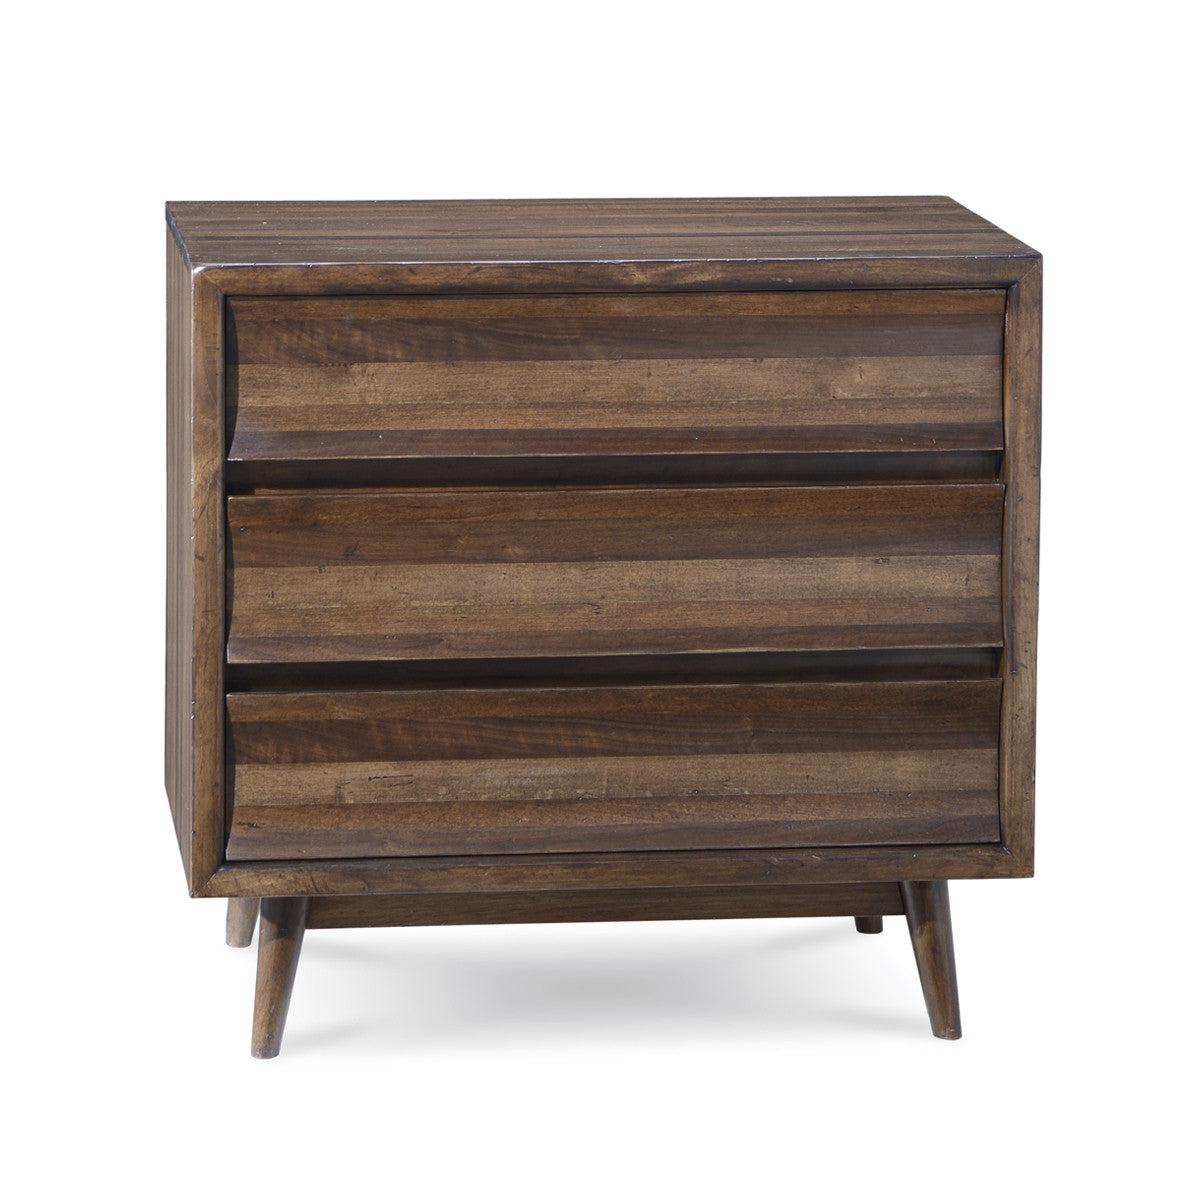 Thornley Timber Bedside Table - Max Sparrow